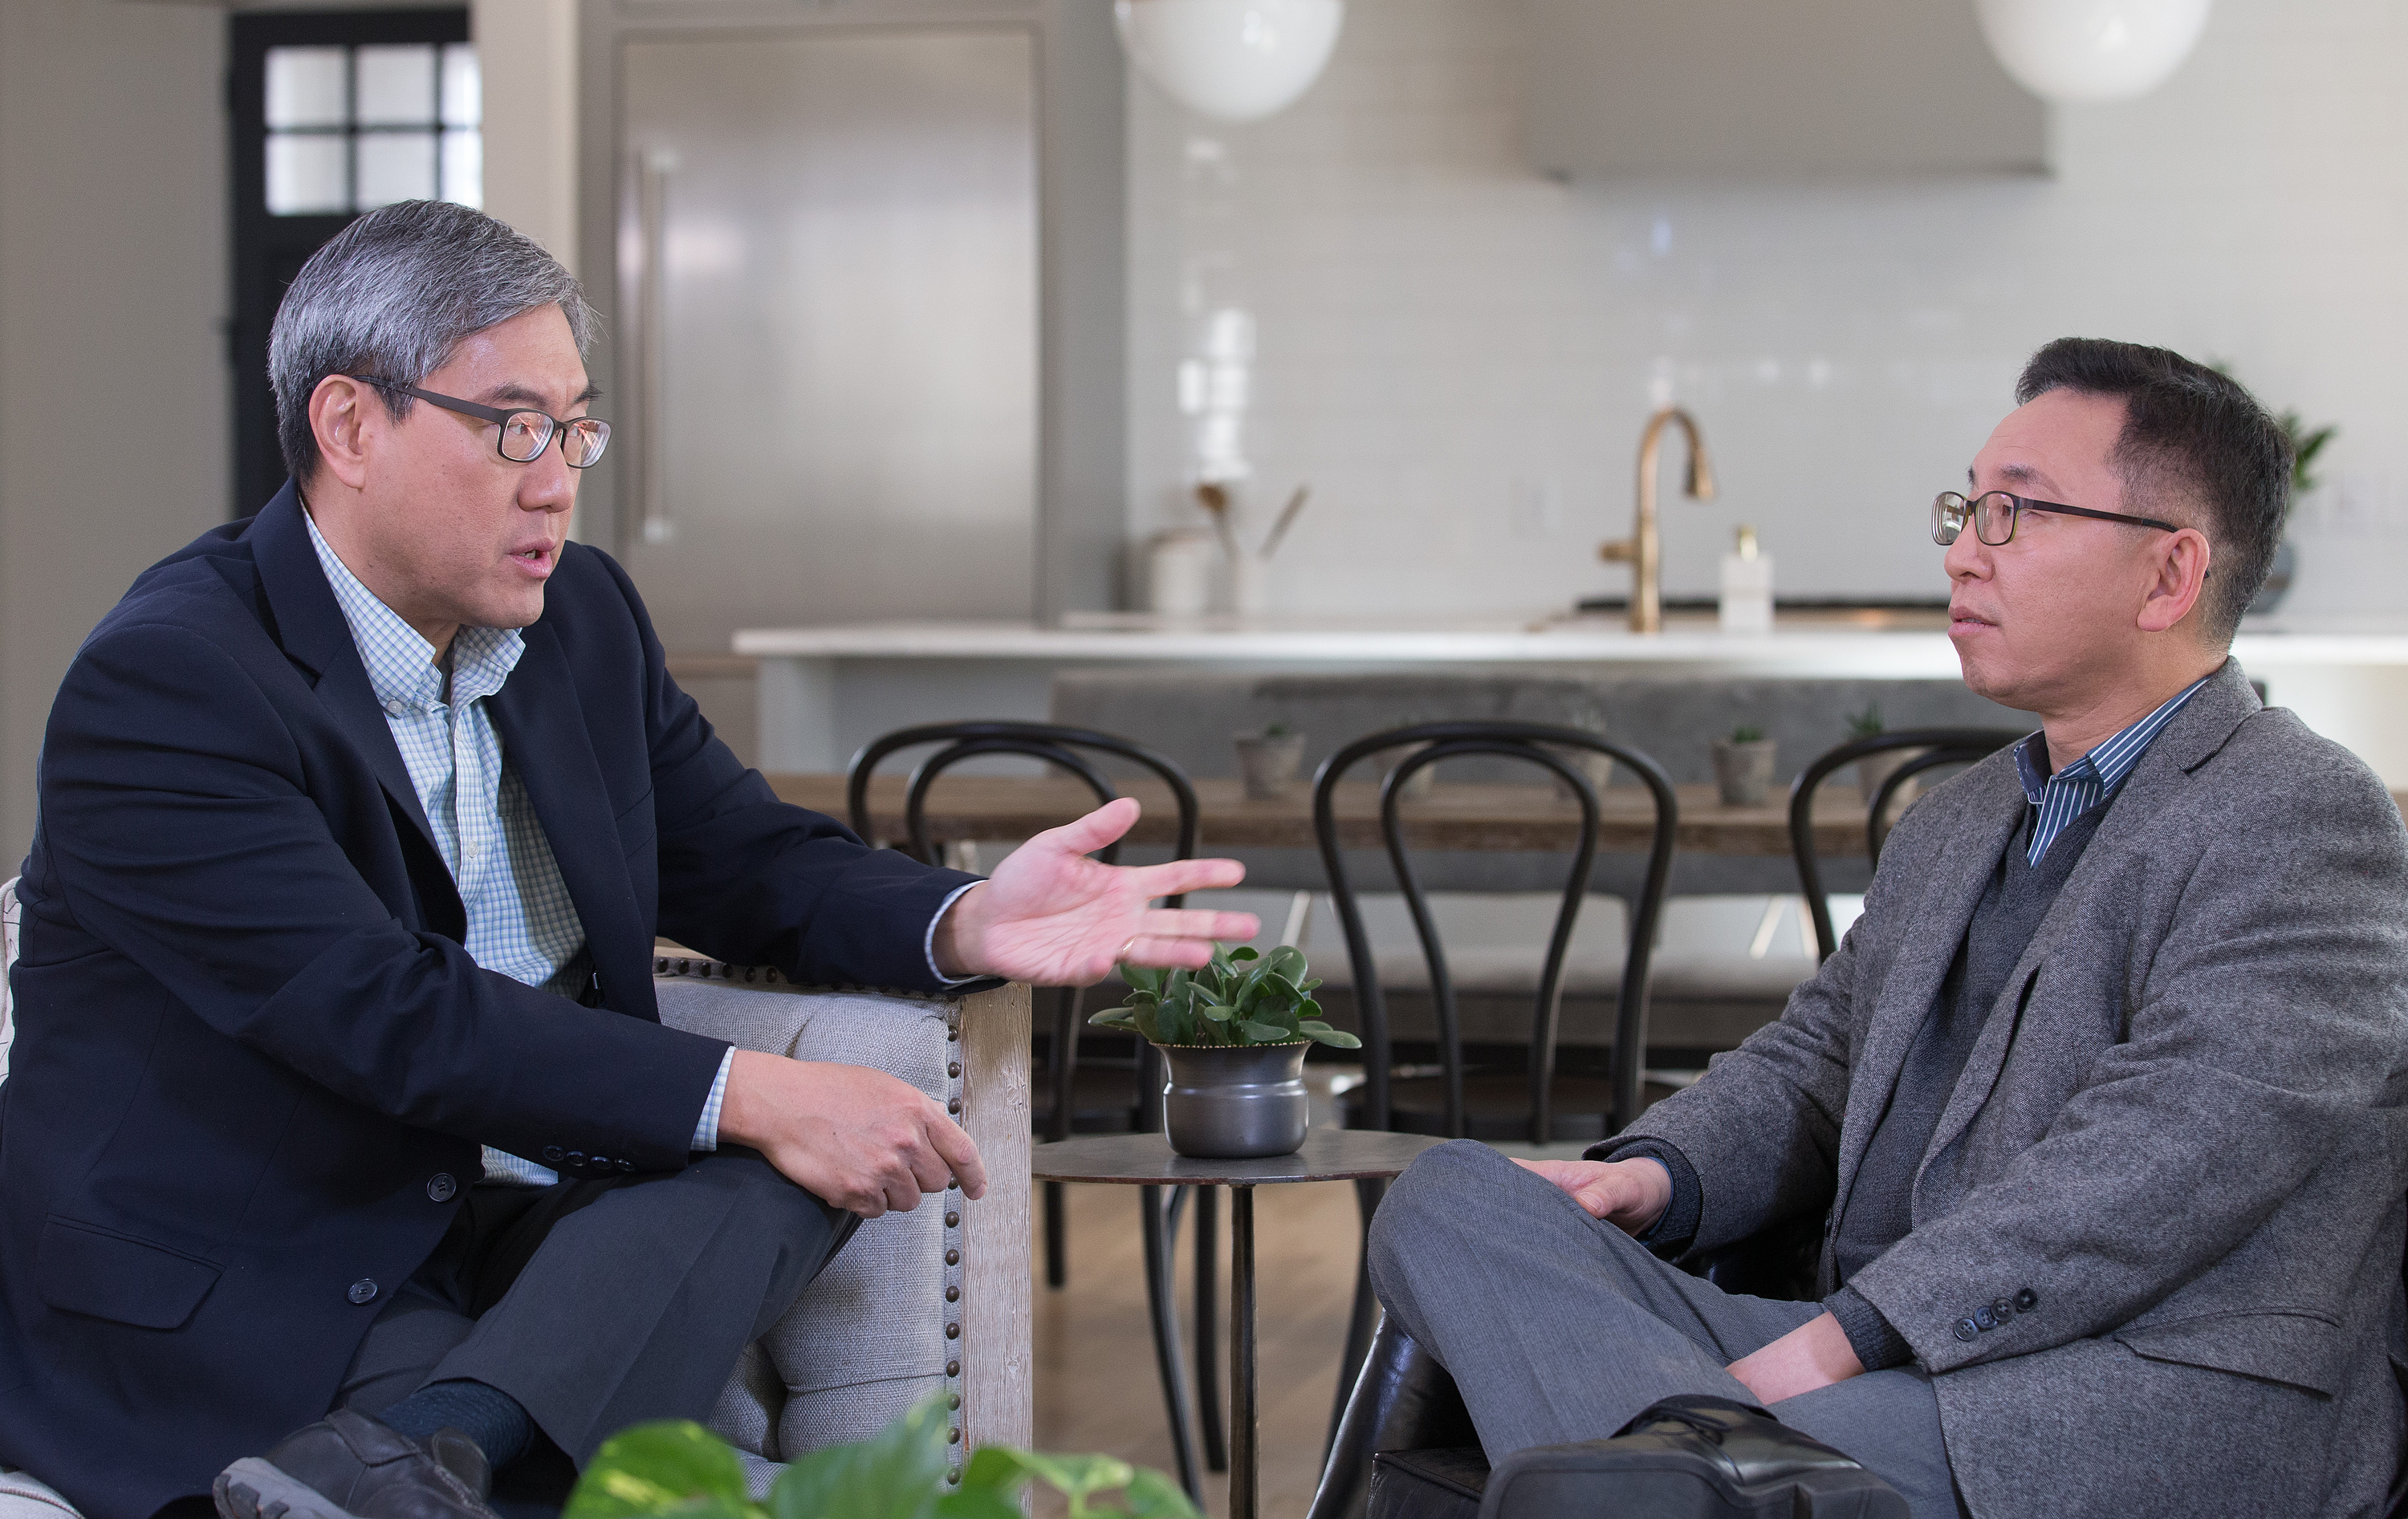 The Revs. Kevin Park (left) and Kil Jae Park share a conversation on offering pastoral care when congregants have differing views, part of the newest GCORR Vital Conversations series. Photo by Mike DuBose, UMNS.